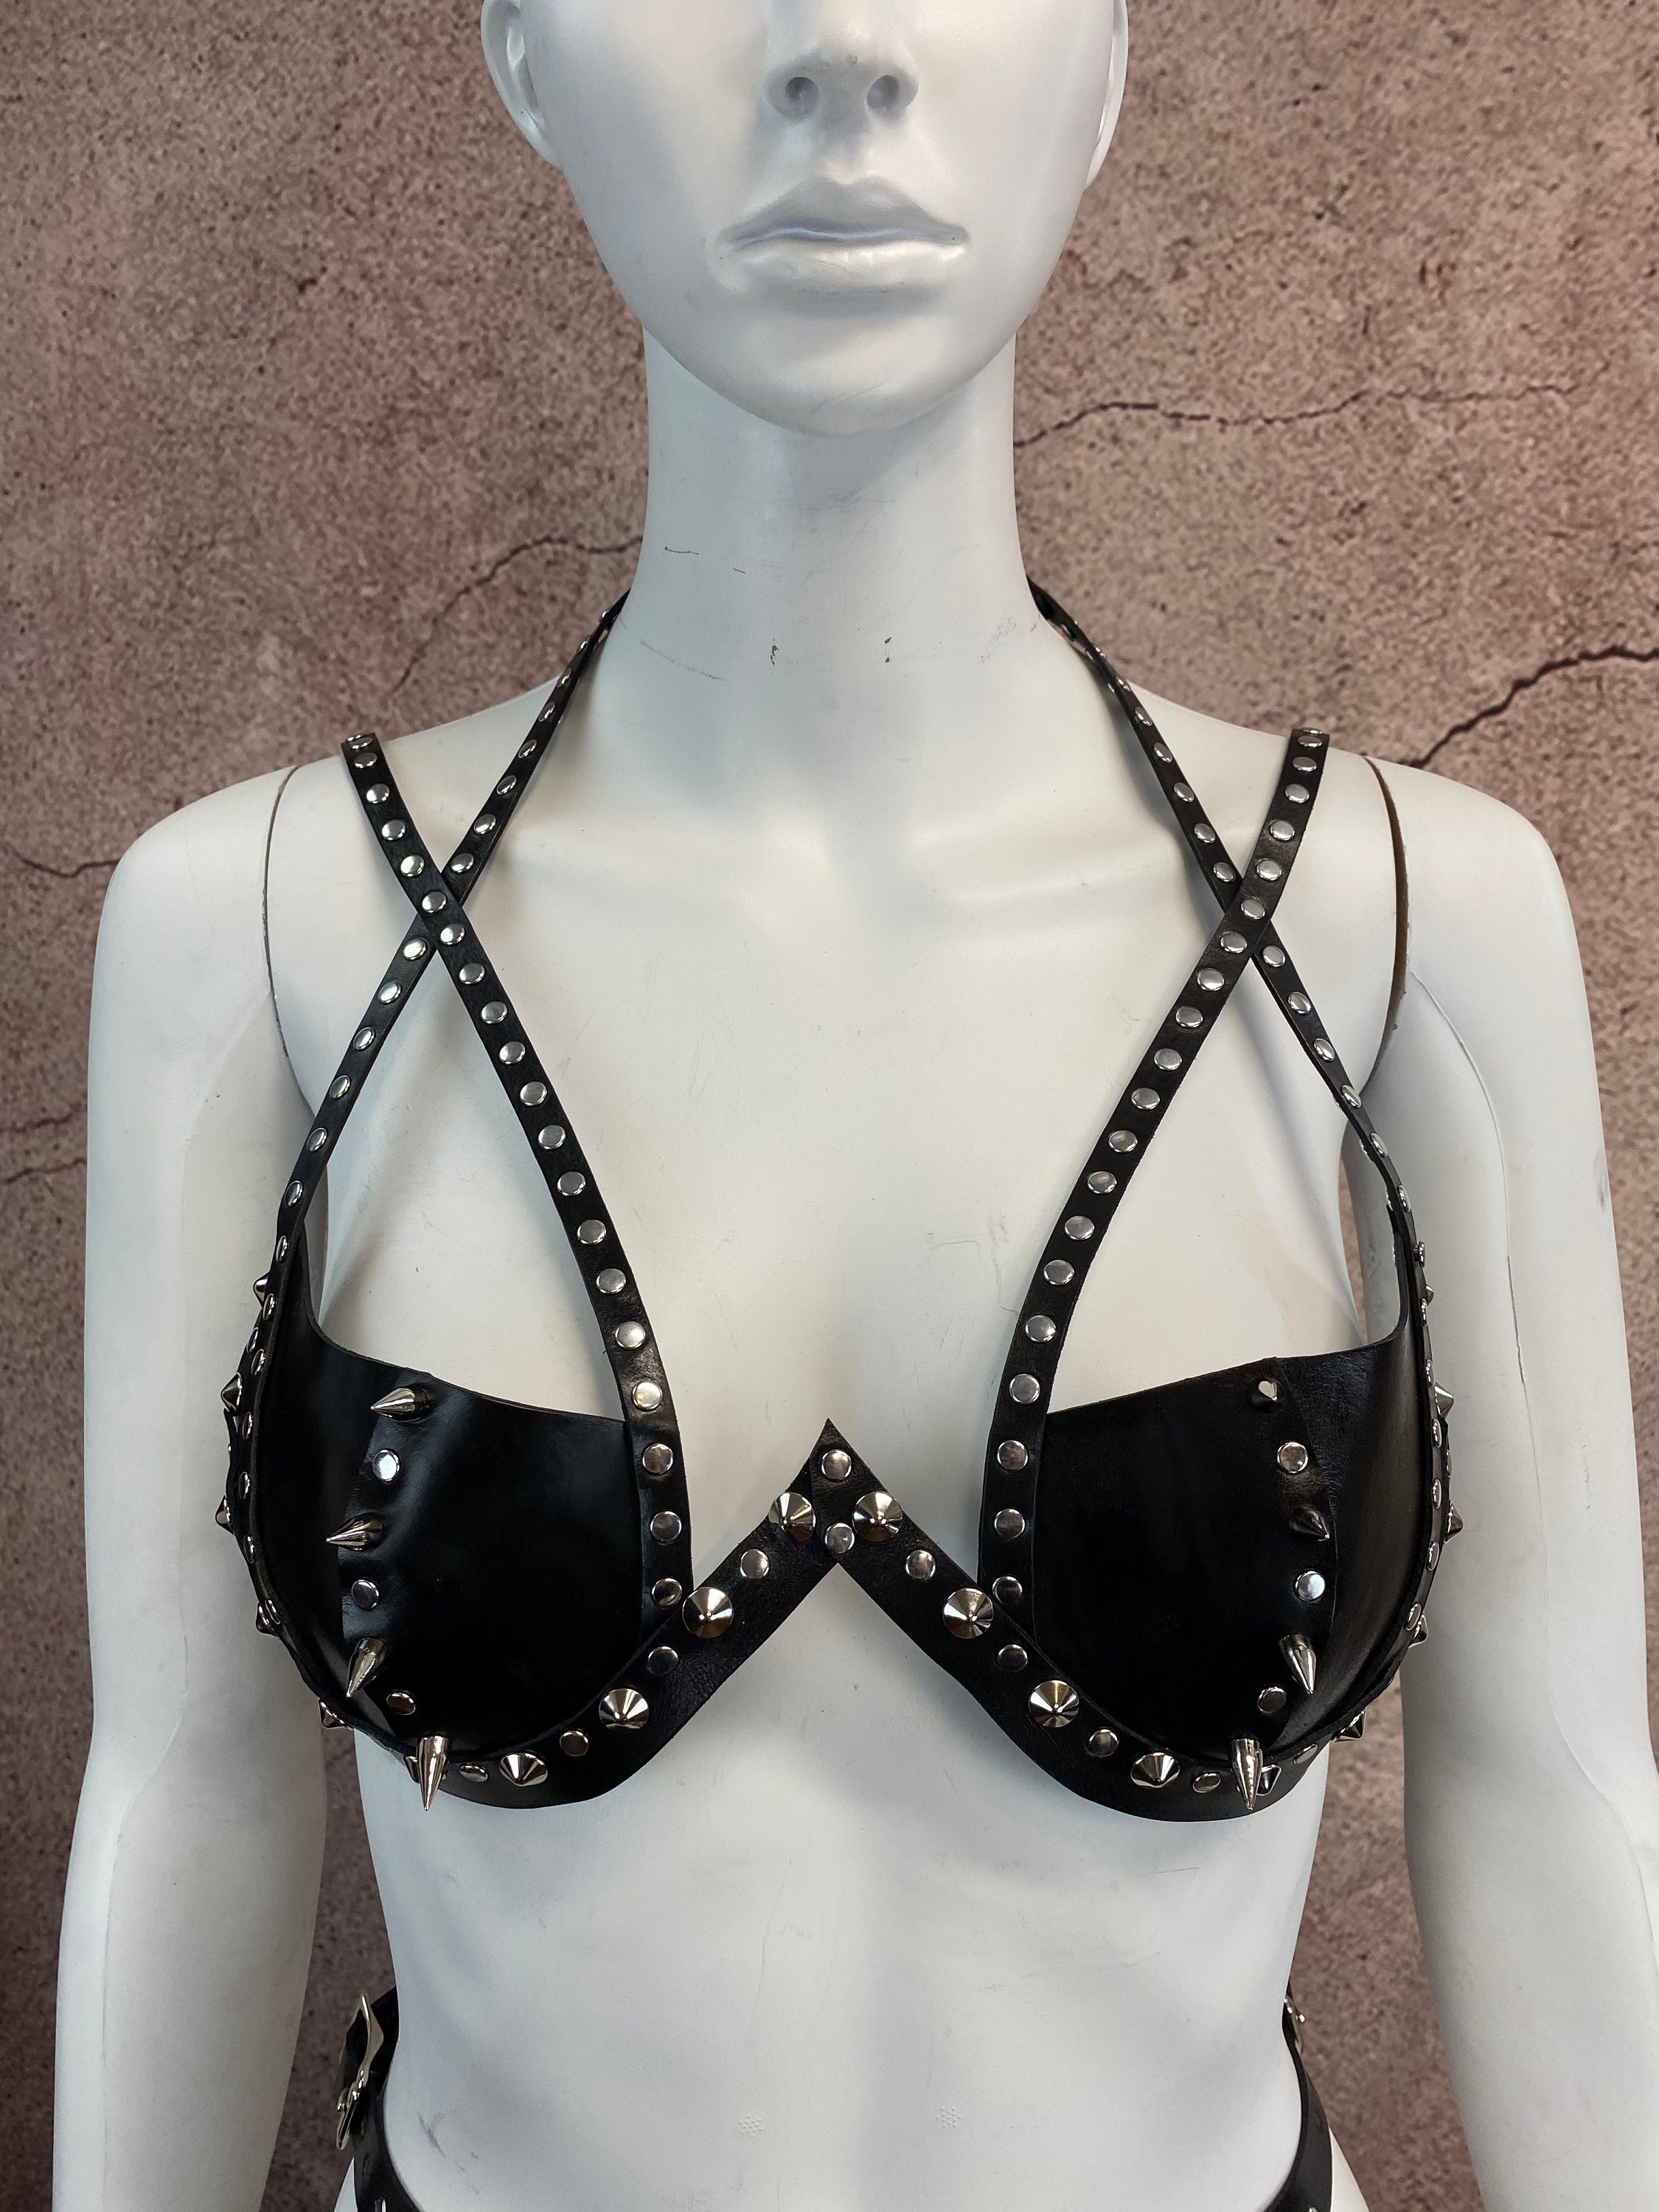 The Stigmata Bra, Leather Bra With Spike and Stud Detail, Hand-dyed Leather  Lingerie, Spiked Bra Harness, Leather Lingerie, Custom Harness -   Denmark